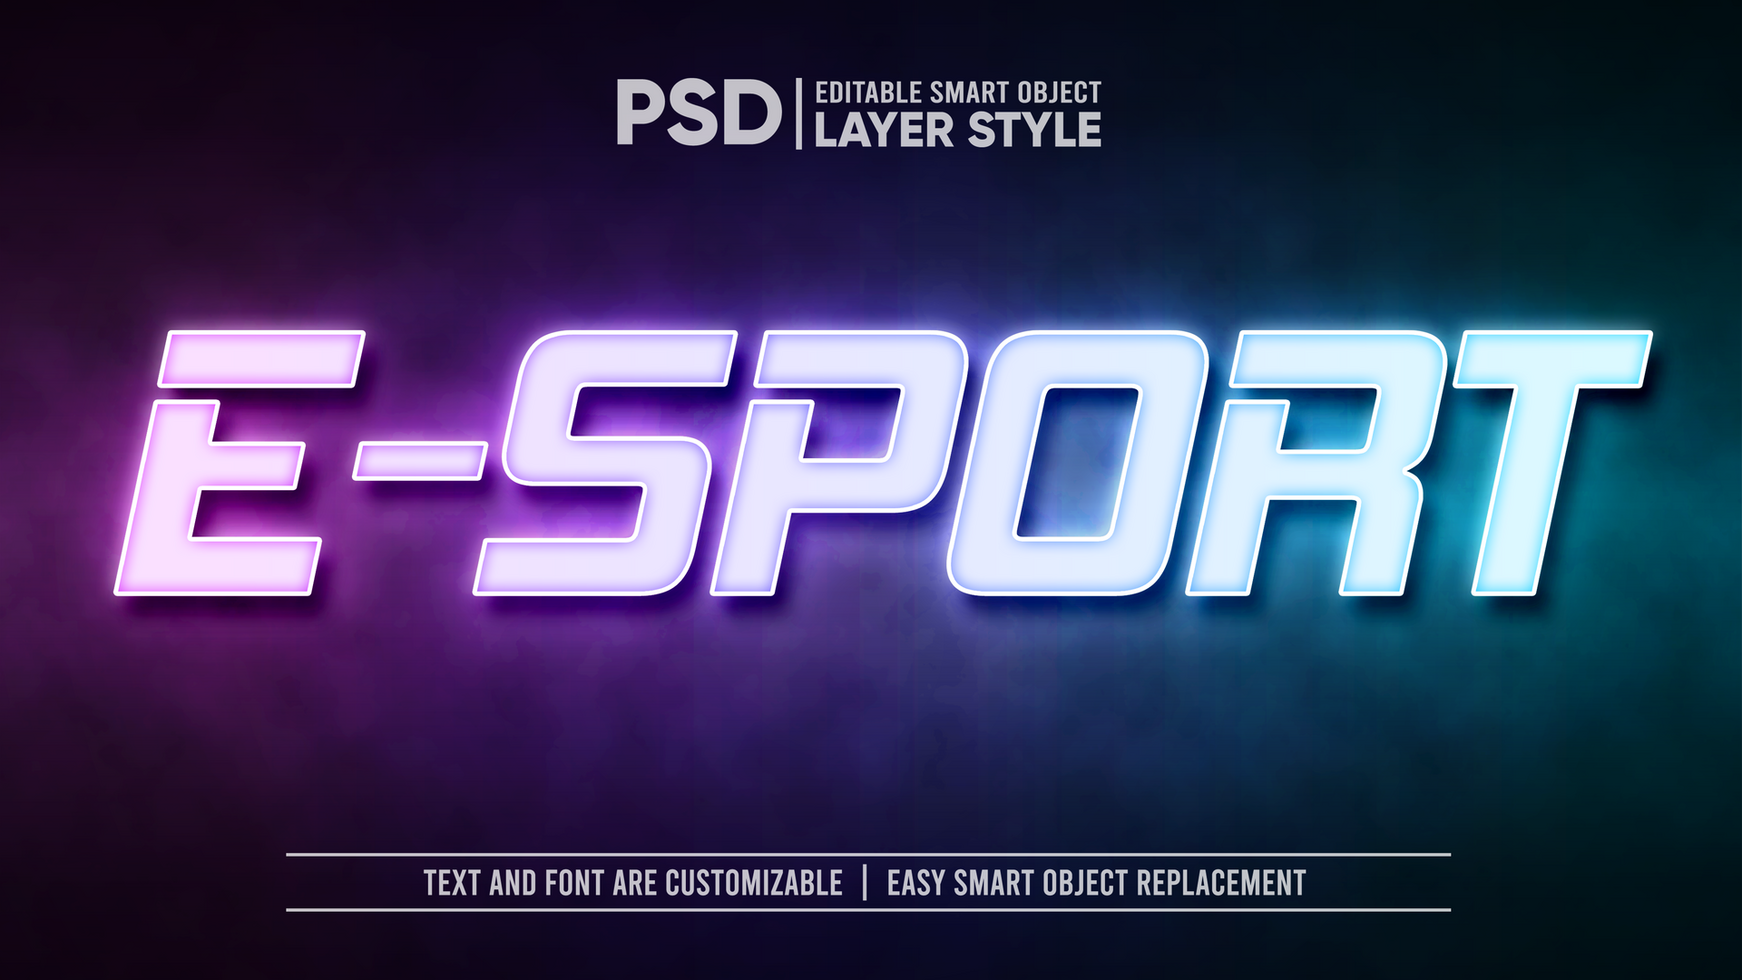 E-sport LED Light Lamp Editable Layer Style Smart Object Text Effect psd